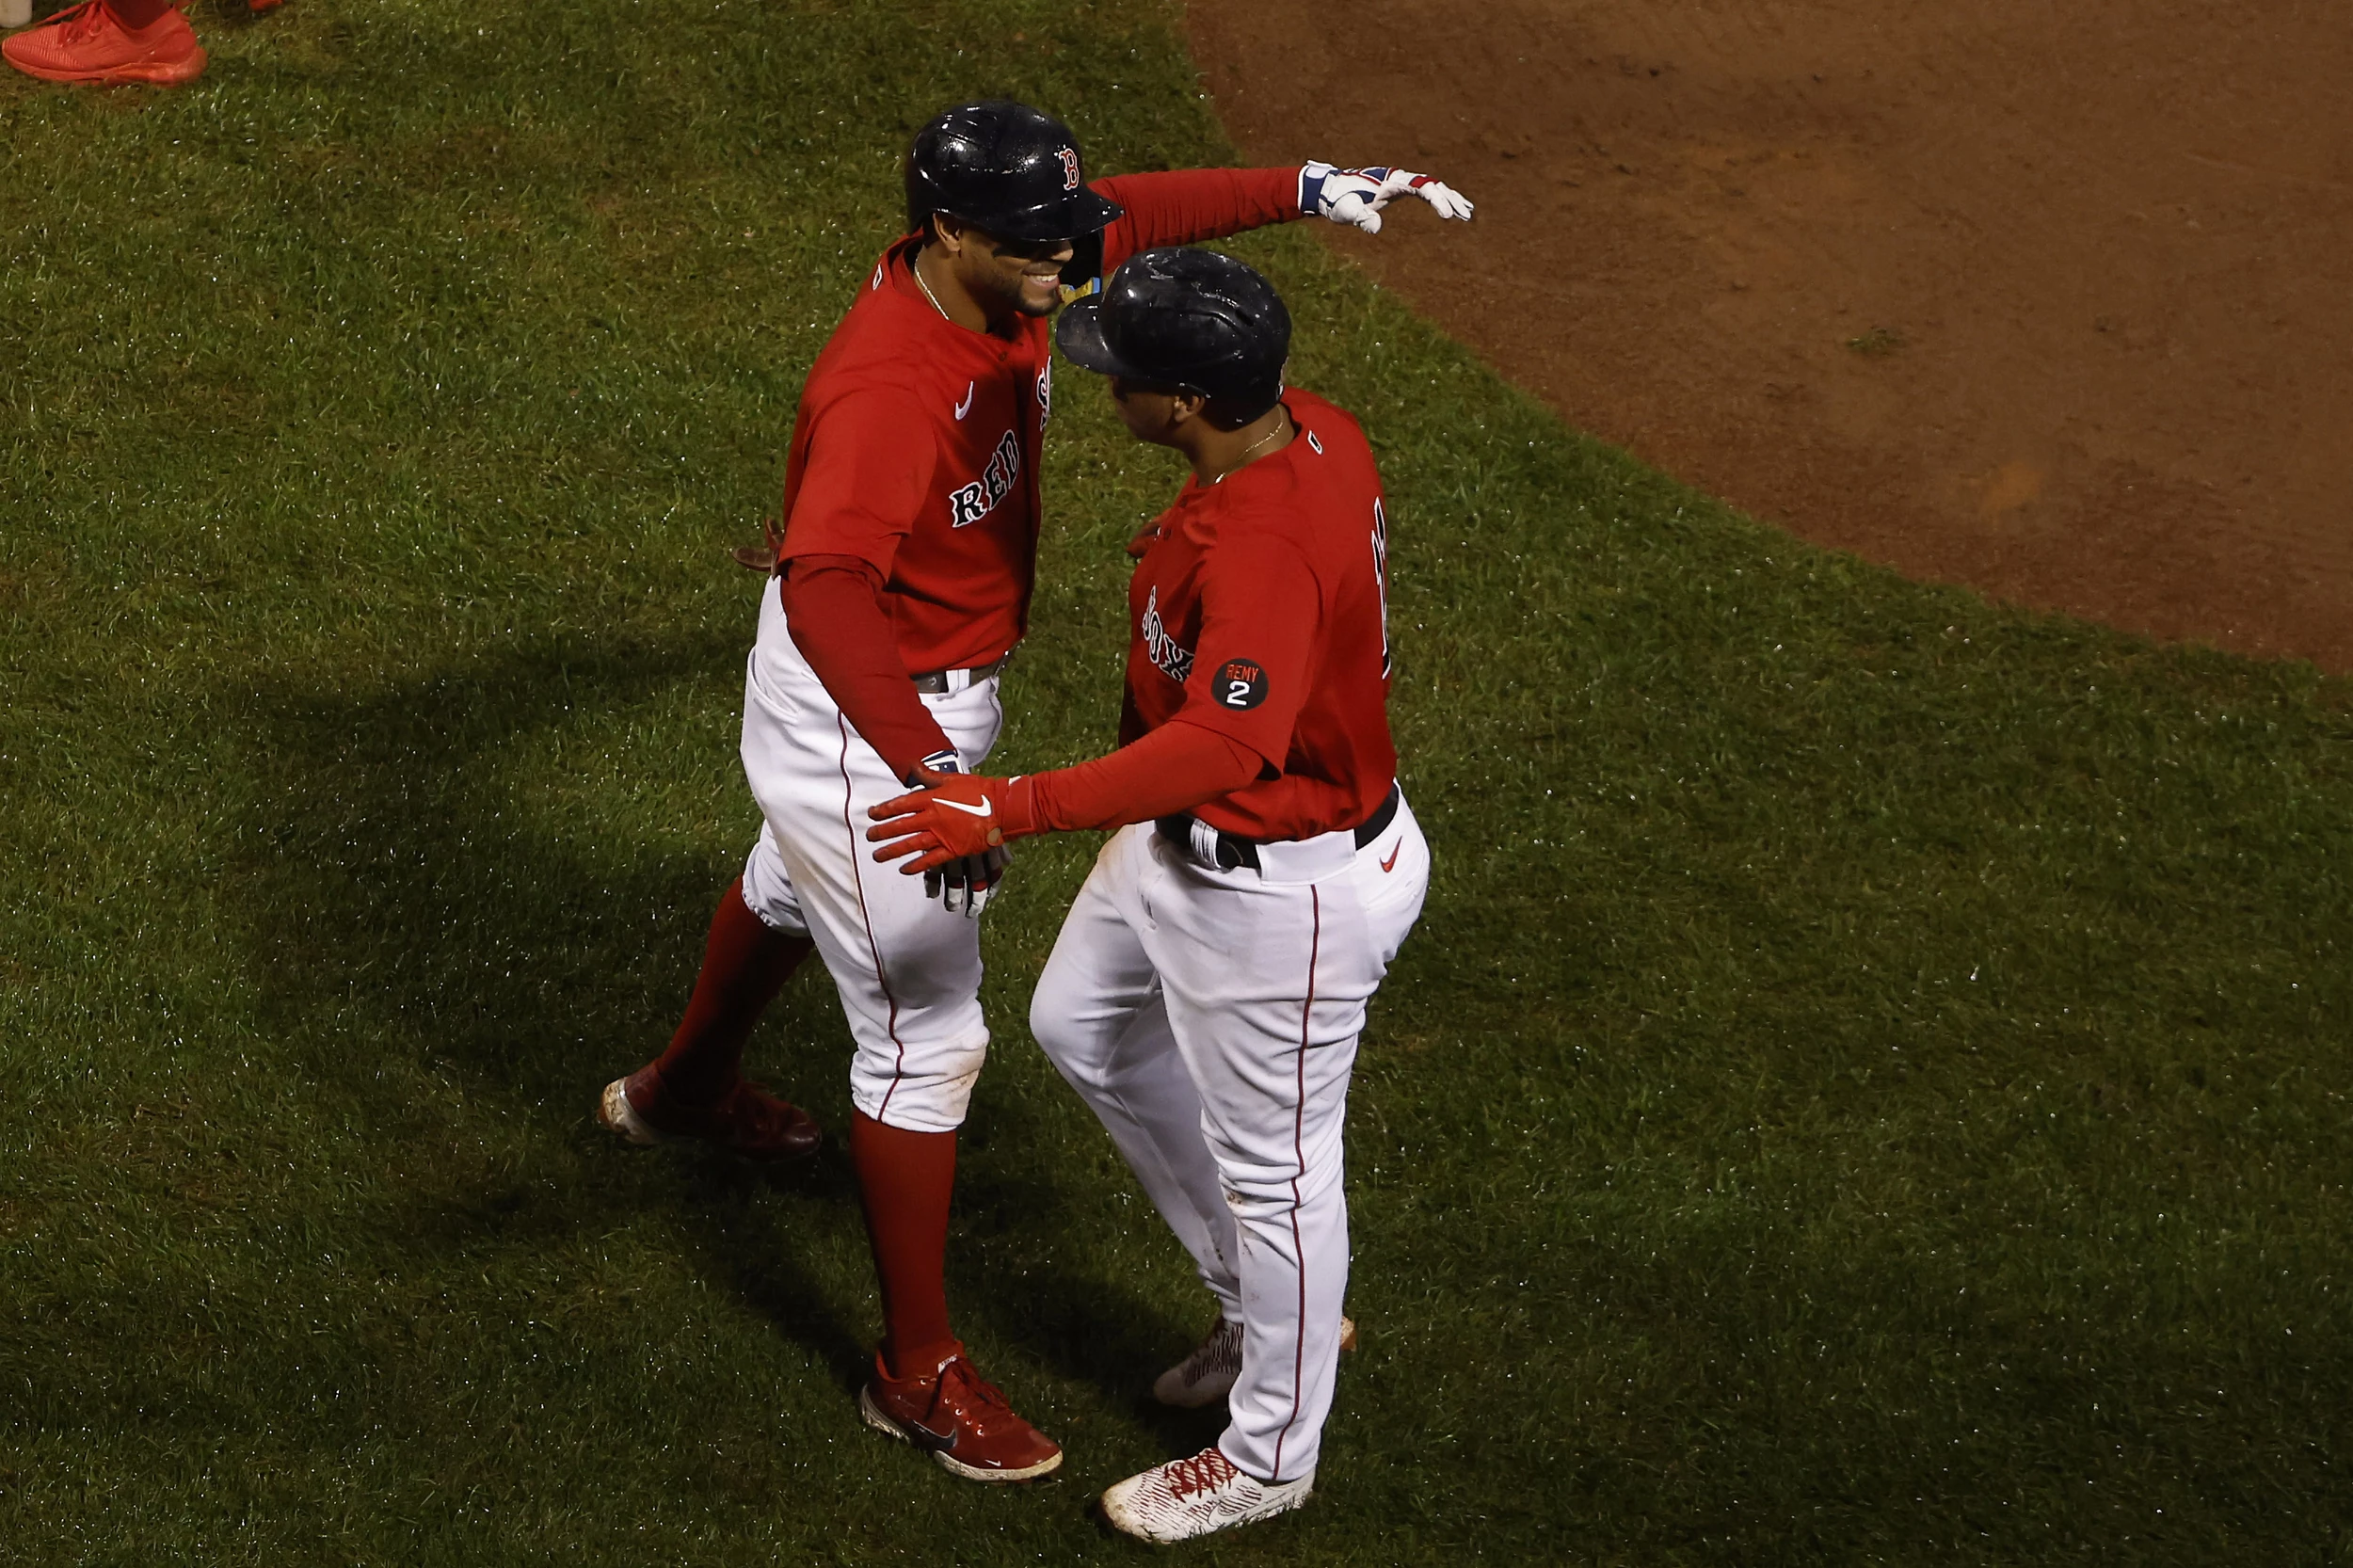 In a rain-shortened Red Sox win, Xander Bogaerts provided one more